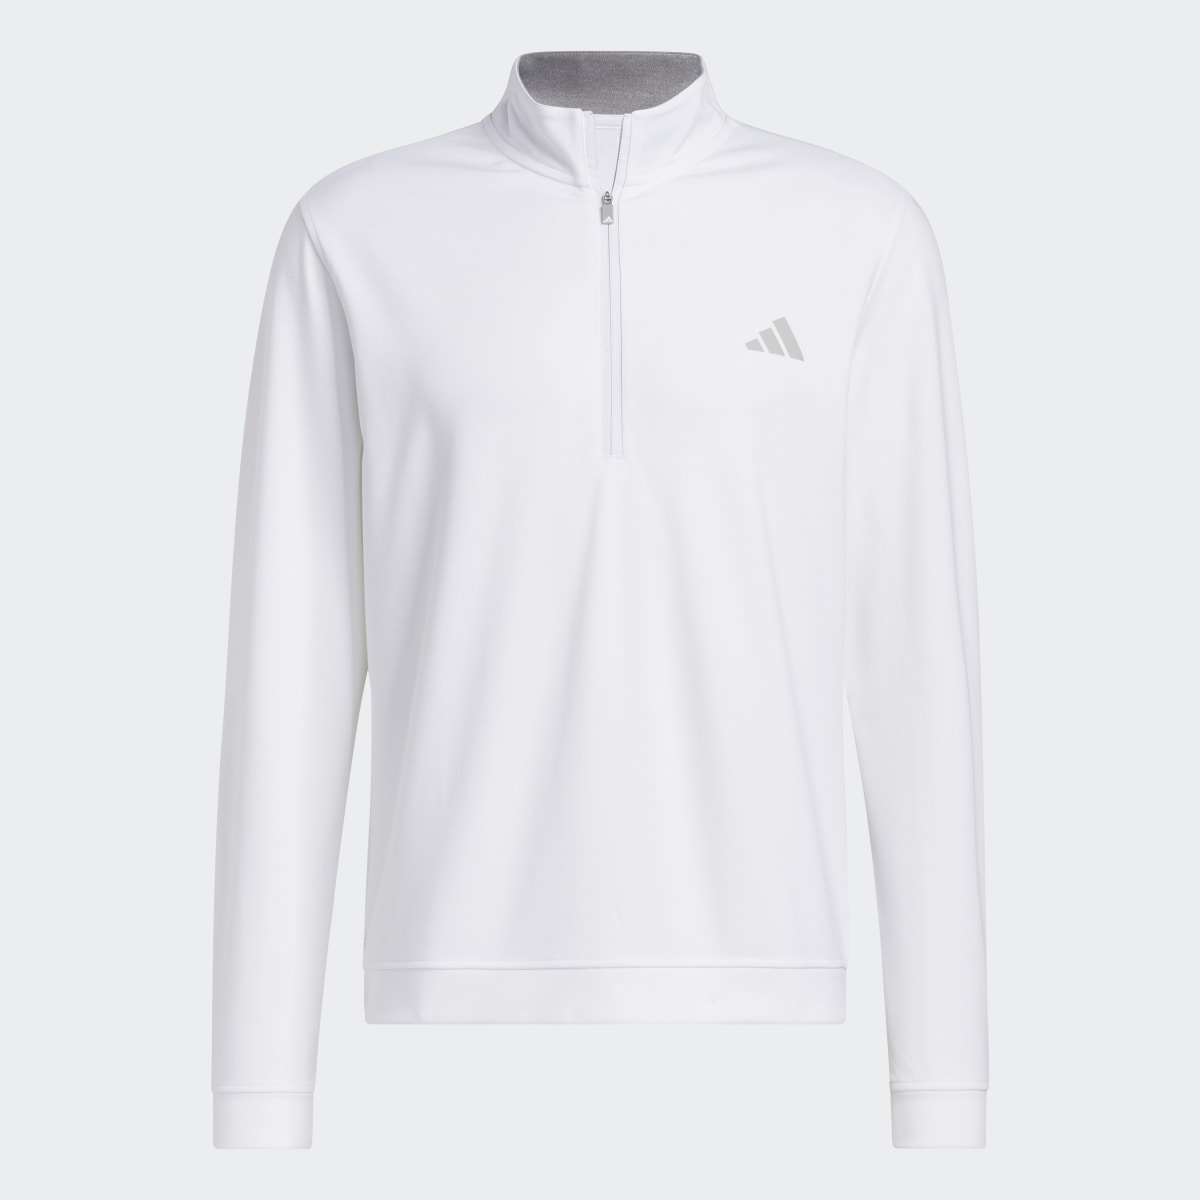 Adidas Elevated 1/4-Zip Pullover. 5